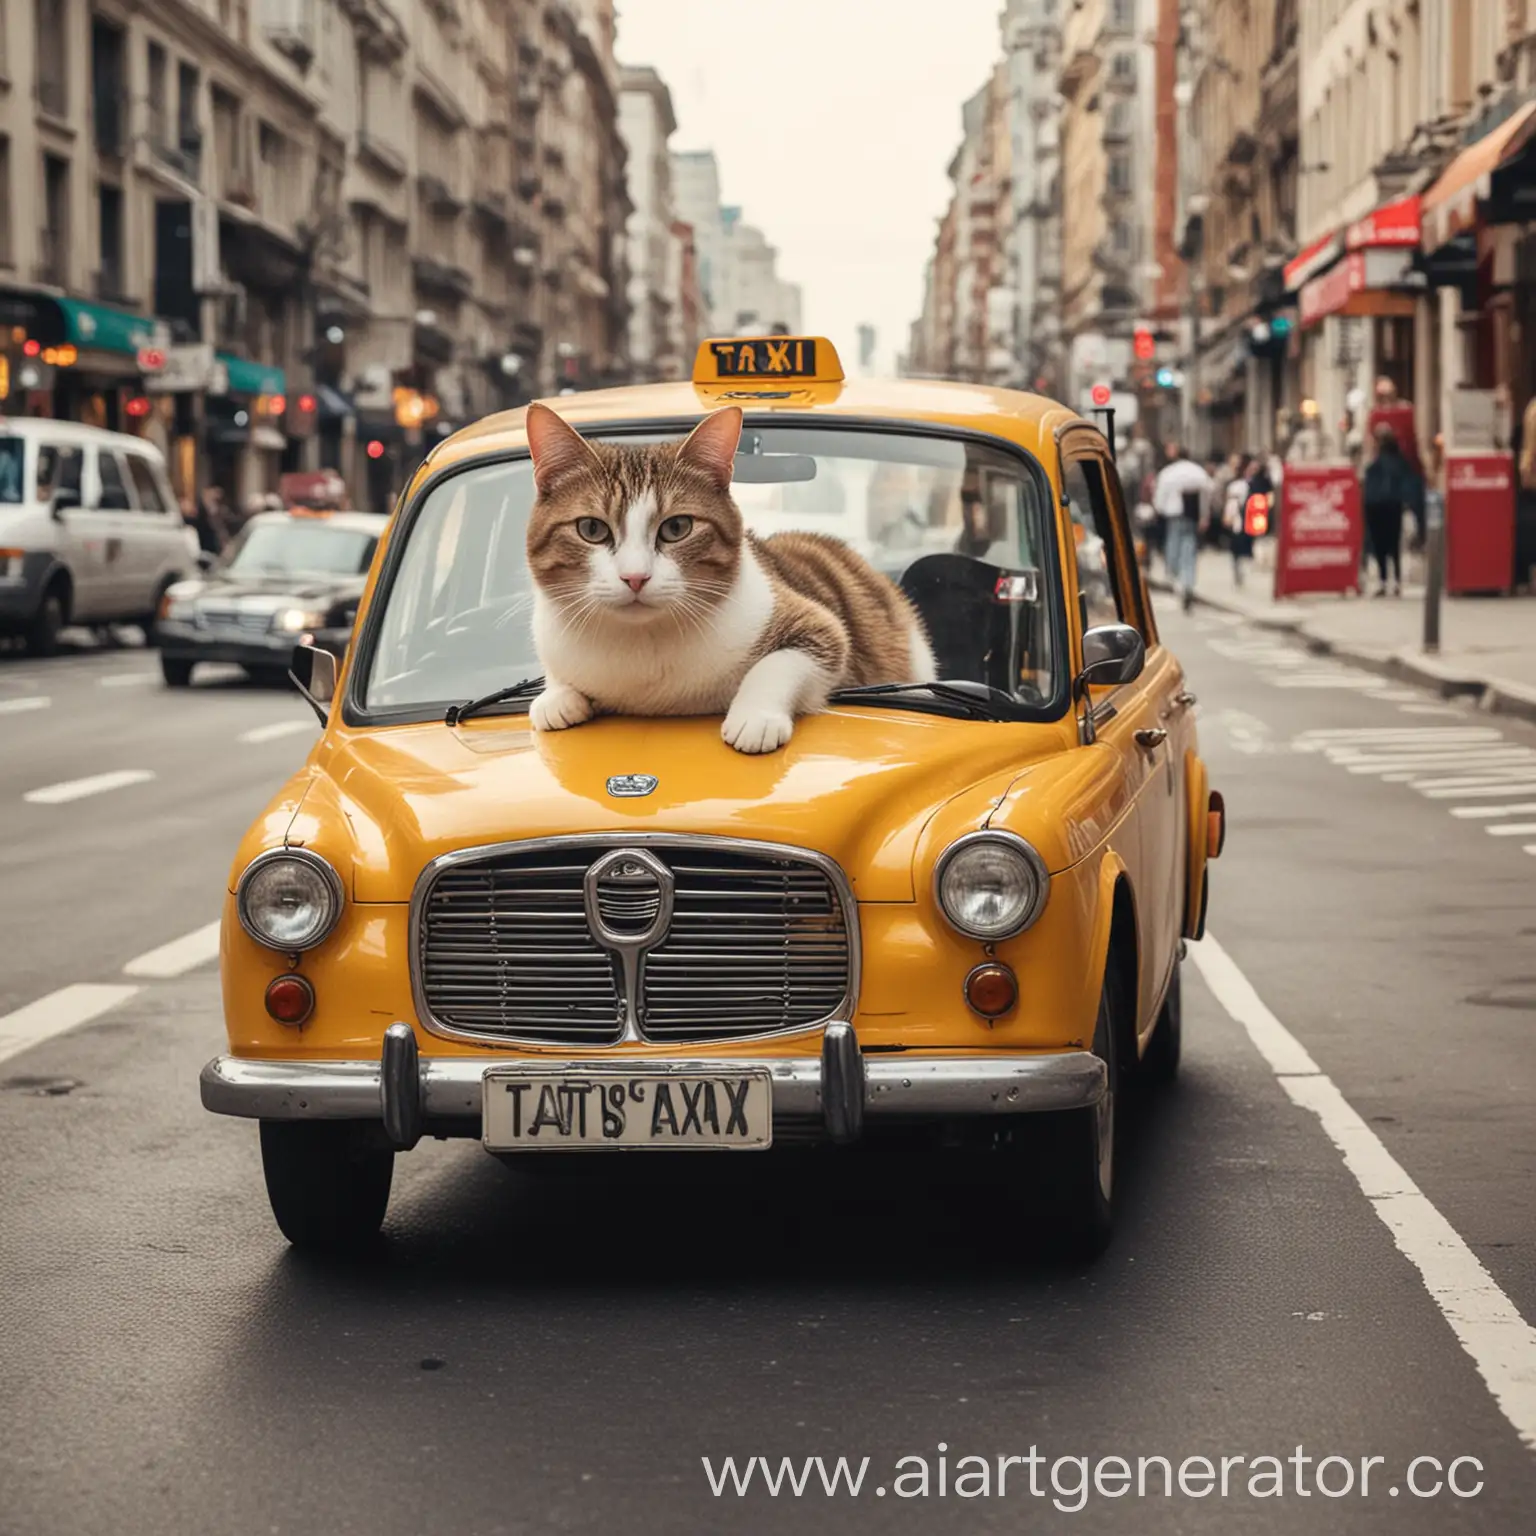 Cat-Driving-Taxi-in-Urban-Cityscape